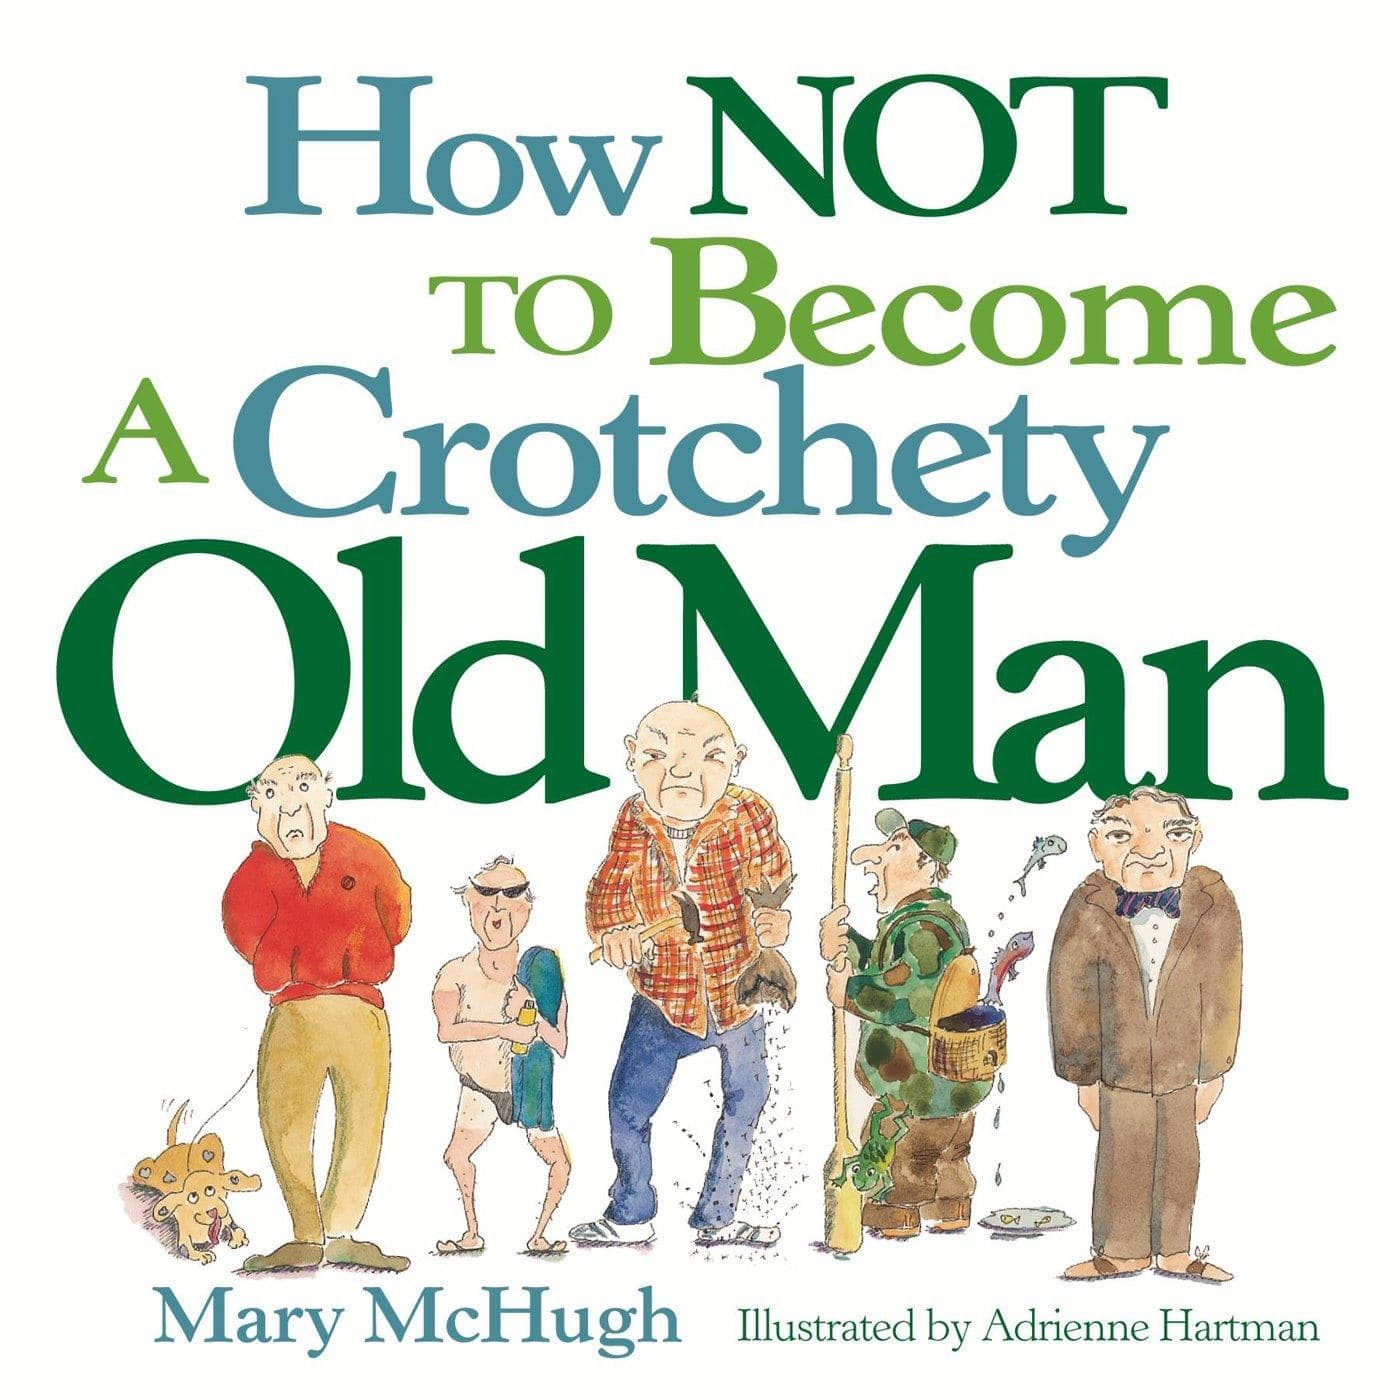 How Not to Become a Crotchety Old Man - SureShot Books Publishing LLC